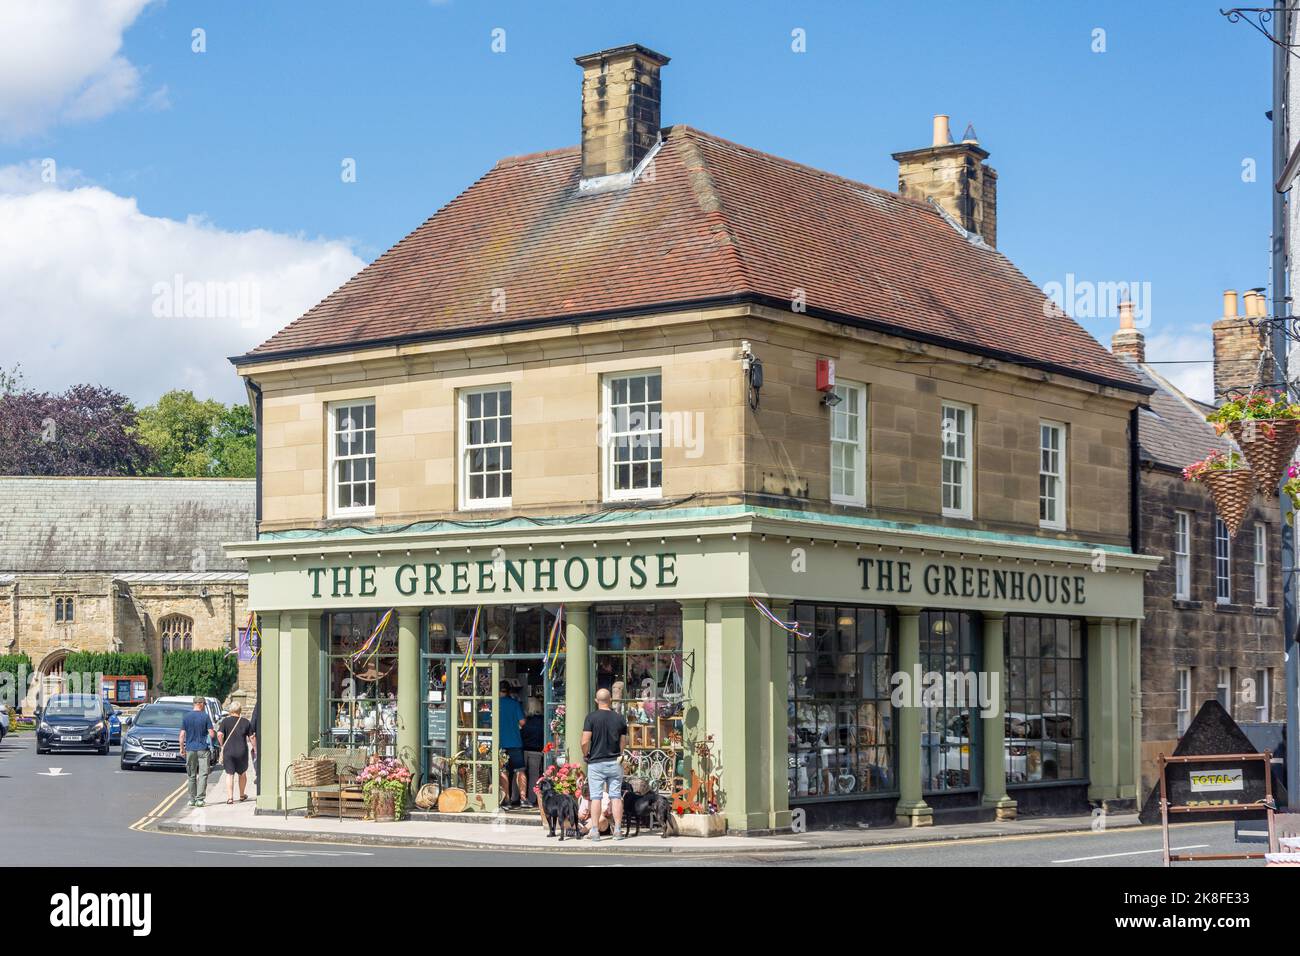 Boutique de cadeaux The Greenhouse, Dial place, Warkworth, Northumberland, Angleterre, Royaume-Uni Banque D'Images